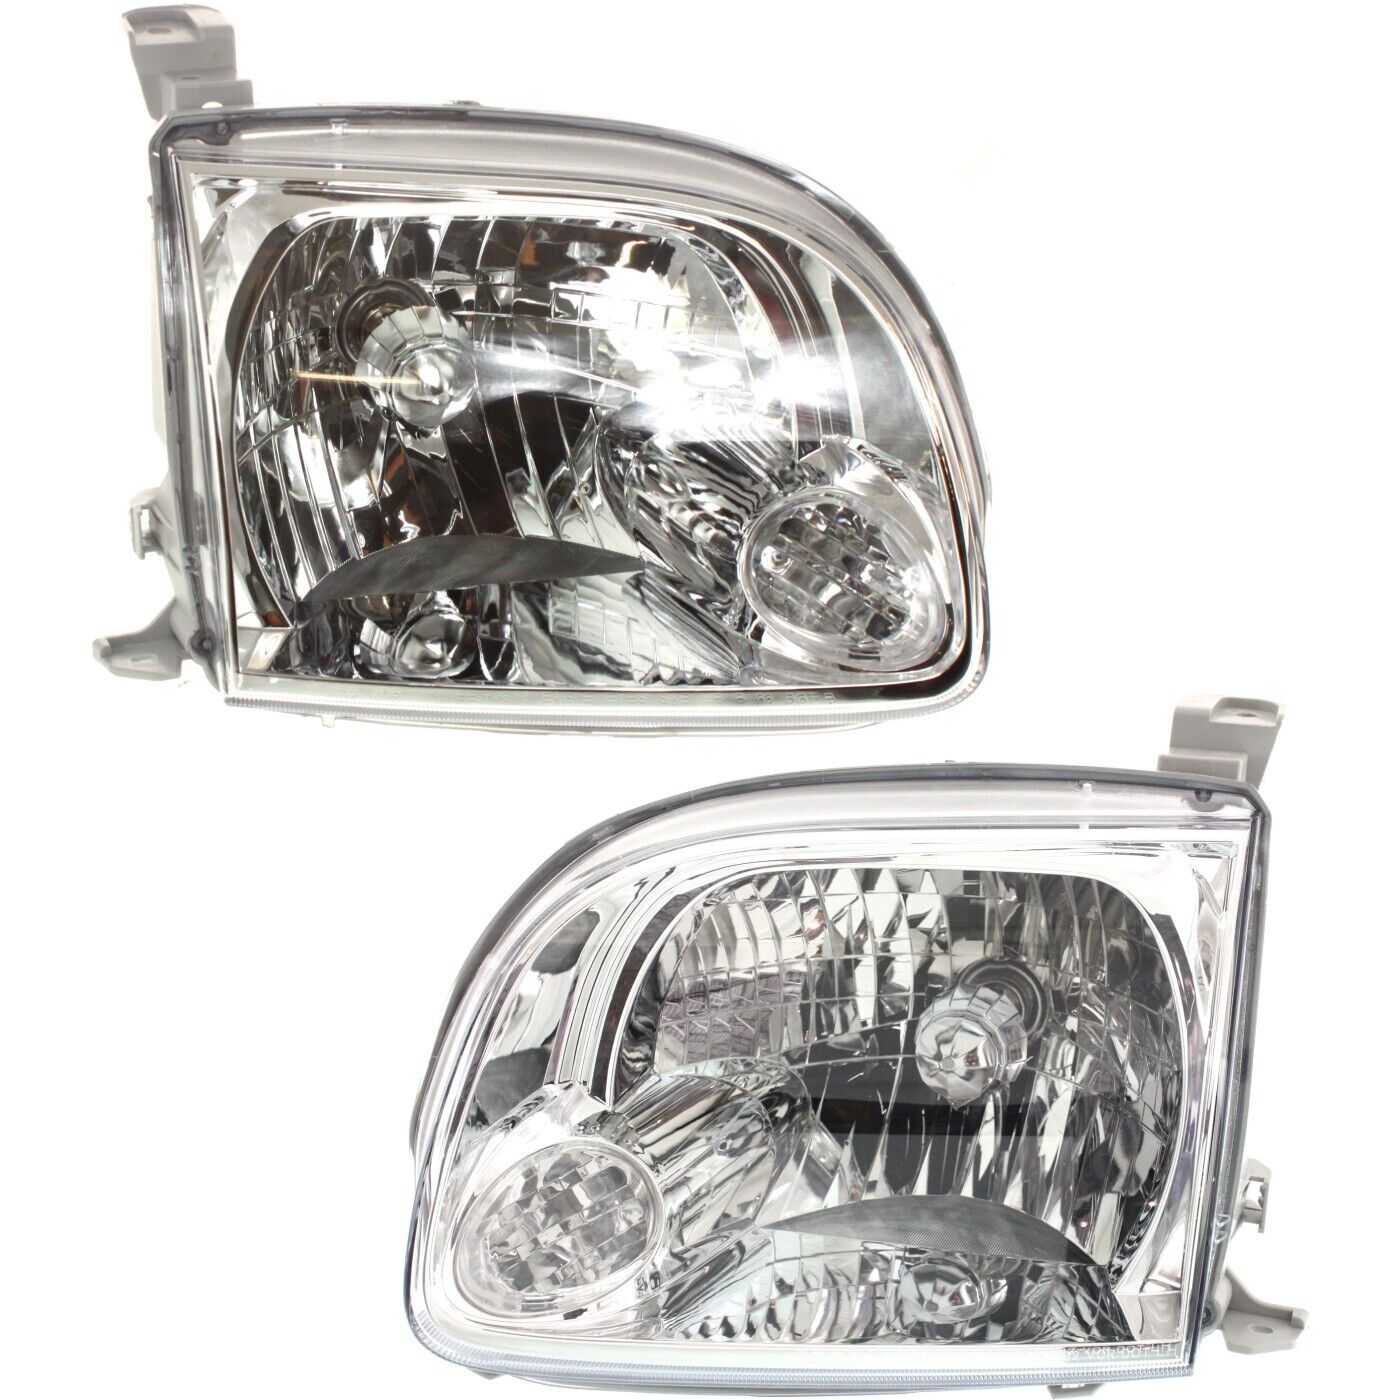 Headlight Left and Right For Toyota 2005-2006 Tundra Regular Access Cab